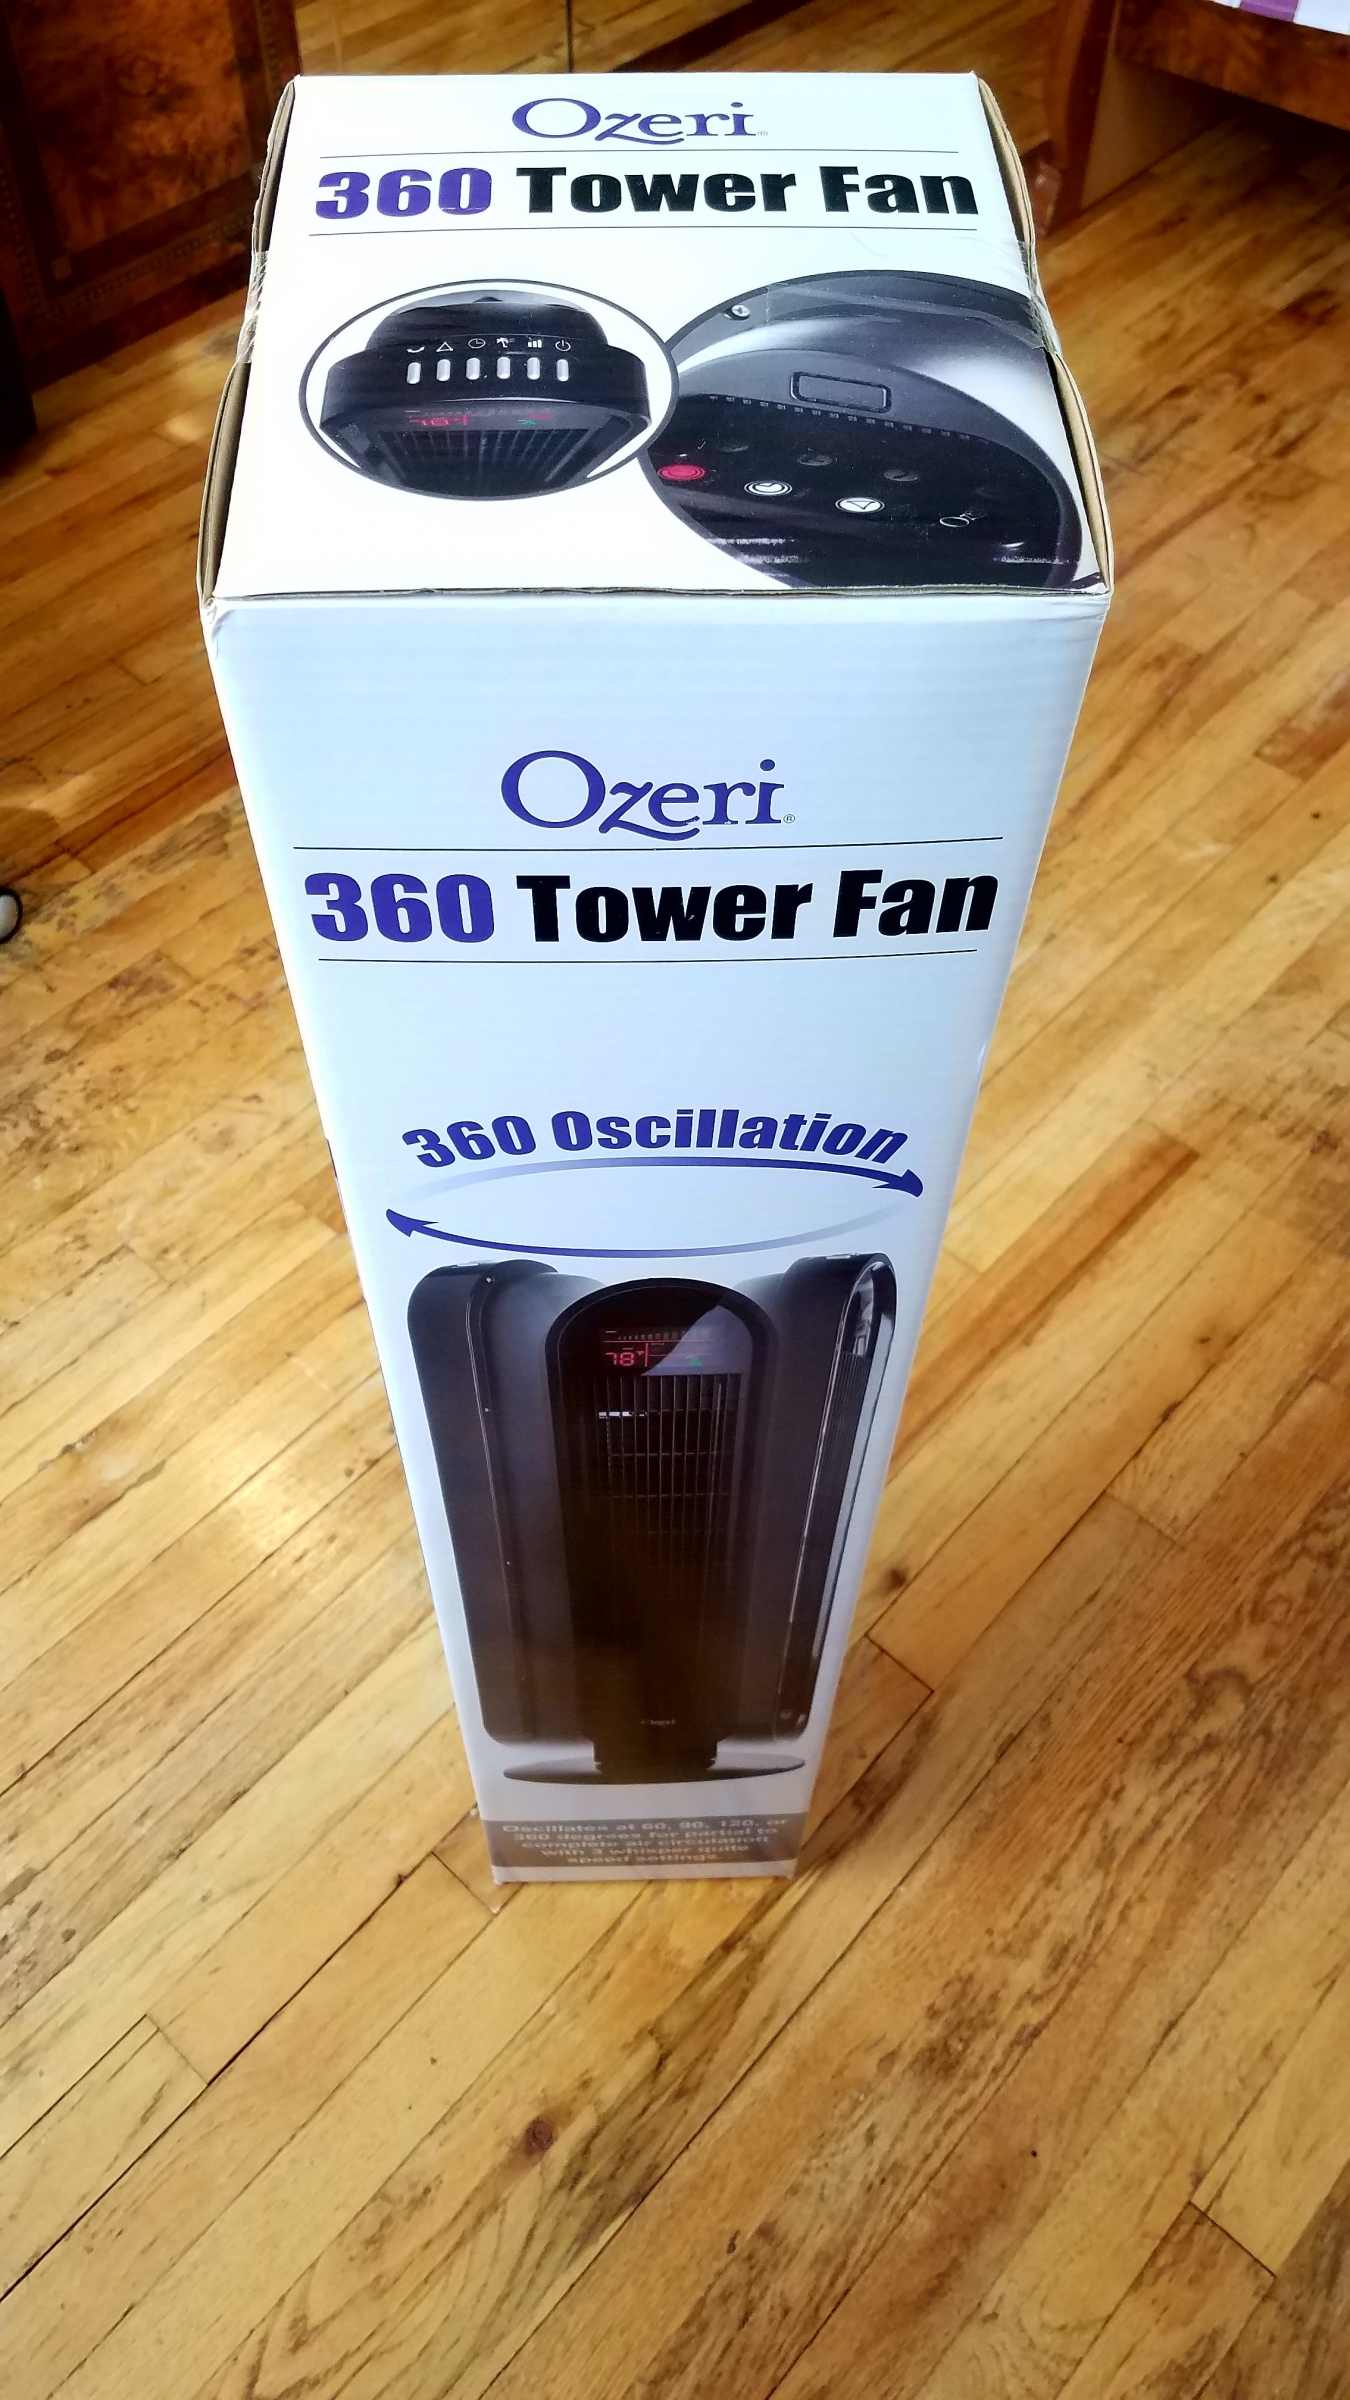 Good tower fan with its main 360 degree oscillation feature that works great (Mar 10, 2017)